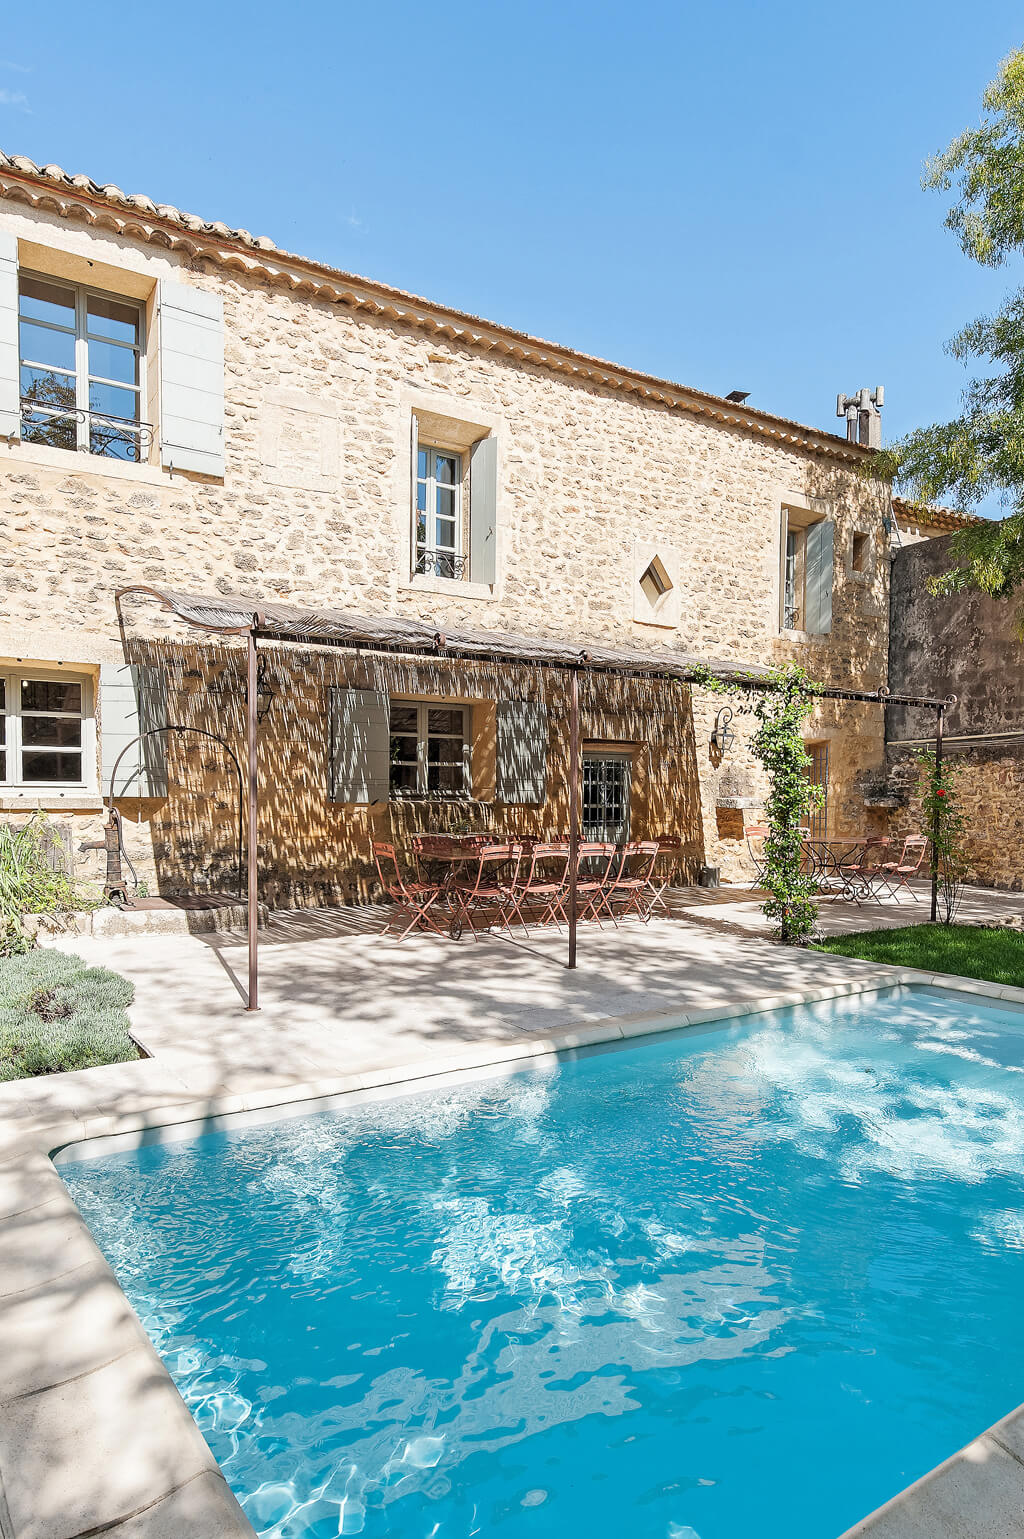 Provence farmhouse pool and outdoor dining in a charming setting.